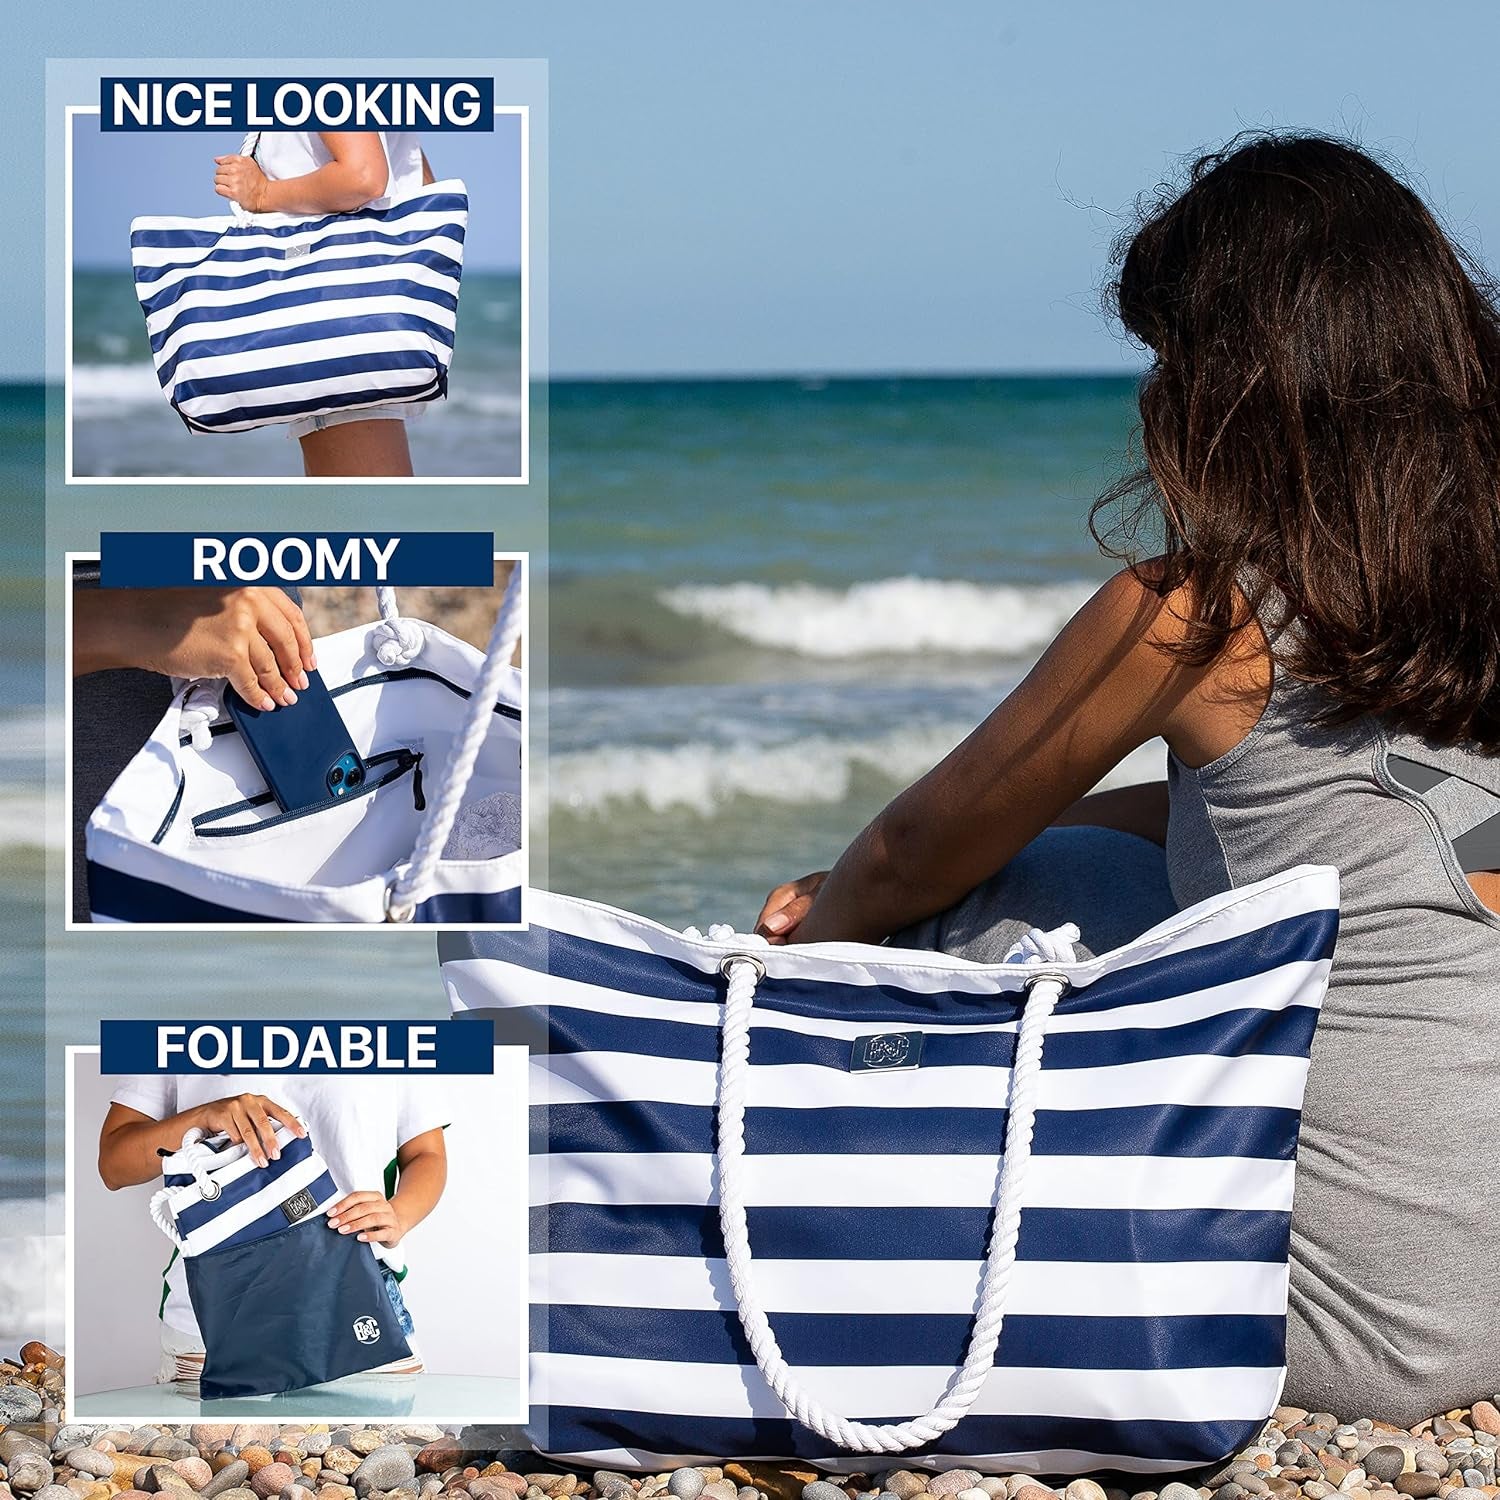 Bag&Carry Large Beach Tote Bag with Zipper - XL Beach Bags Waterproof Sandproof - Oversized Beach Bag with Pockets